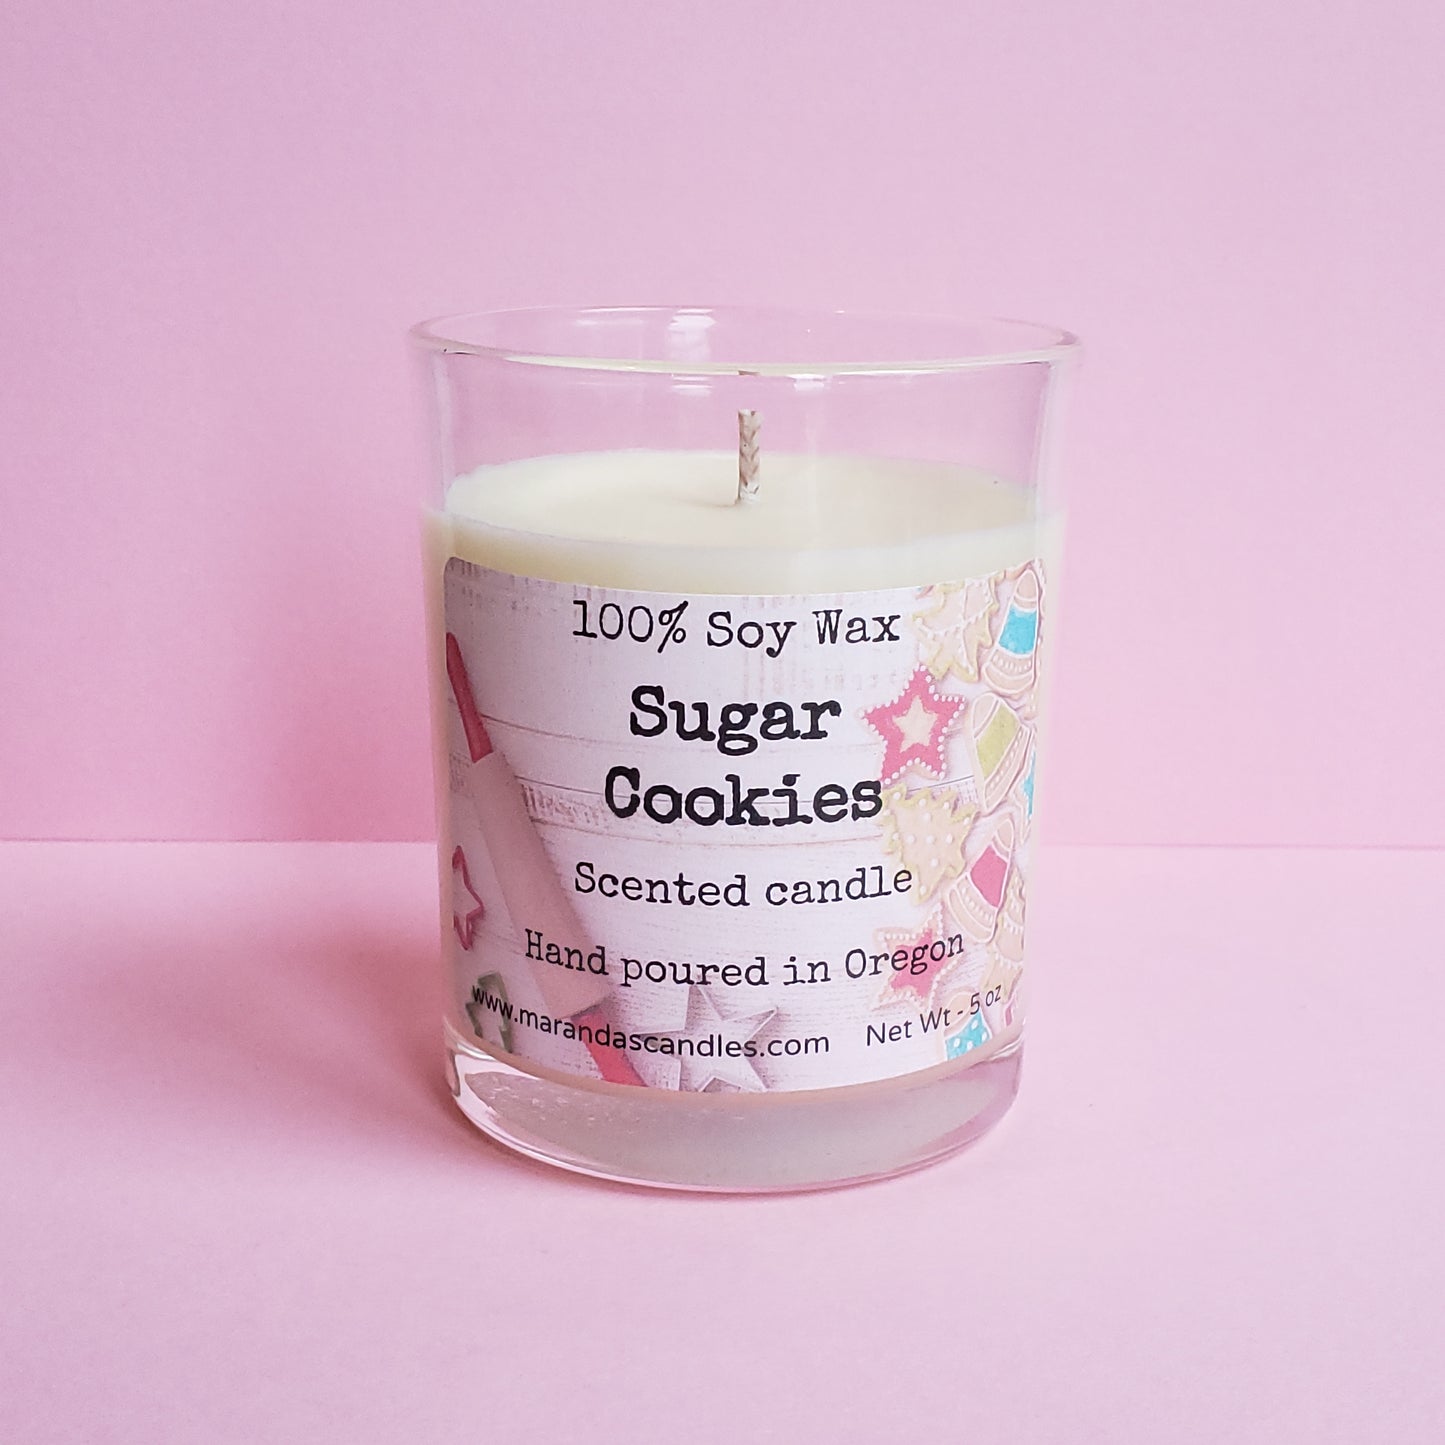 Sugar cookies Scented Soy Wax Candle/Wax melts